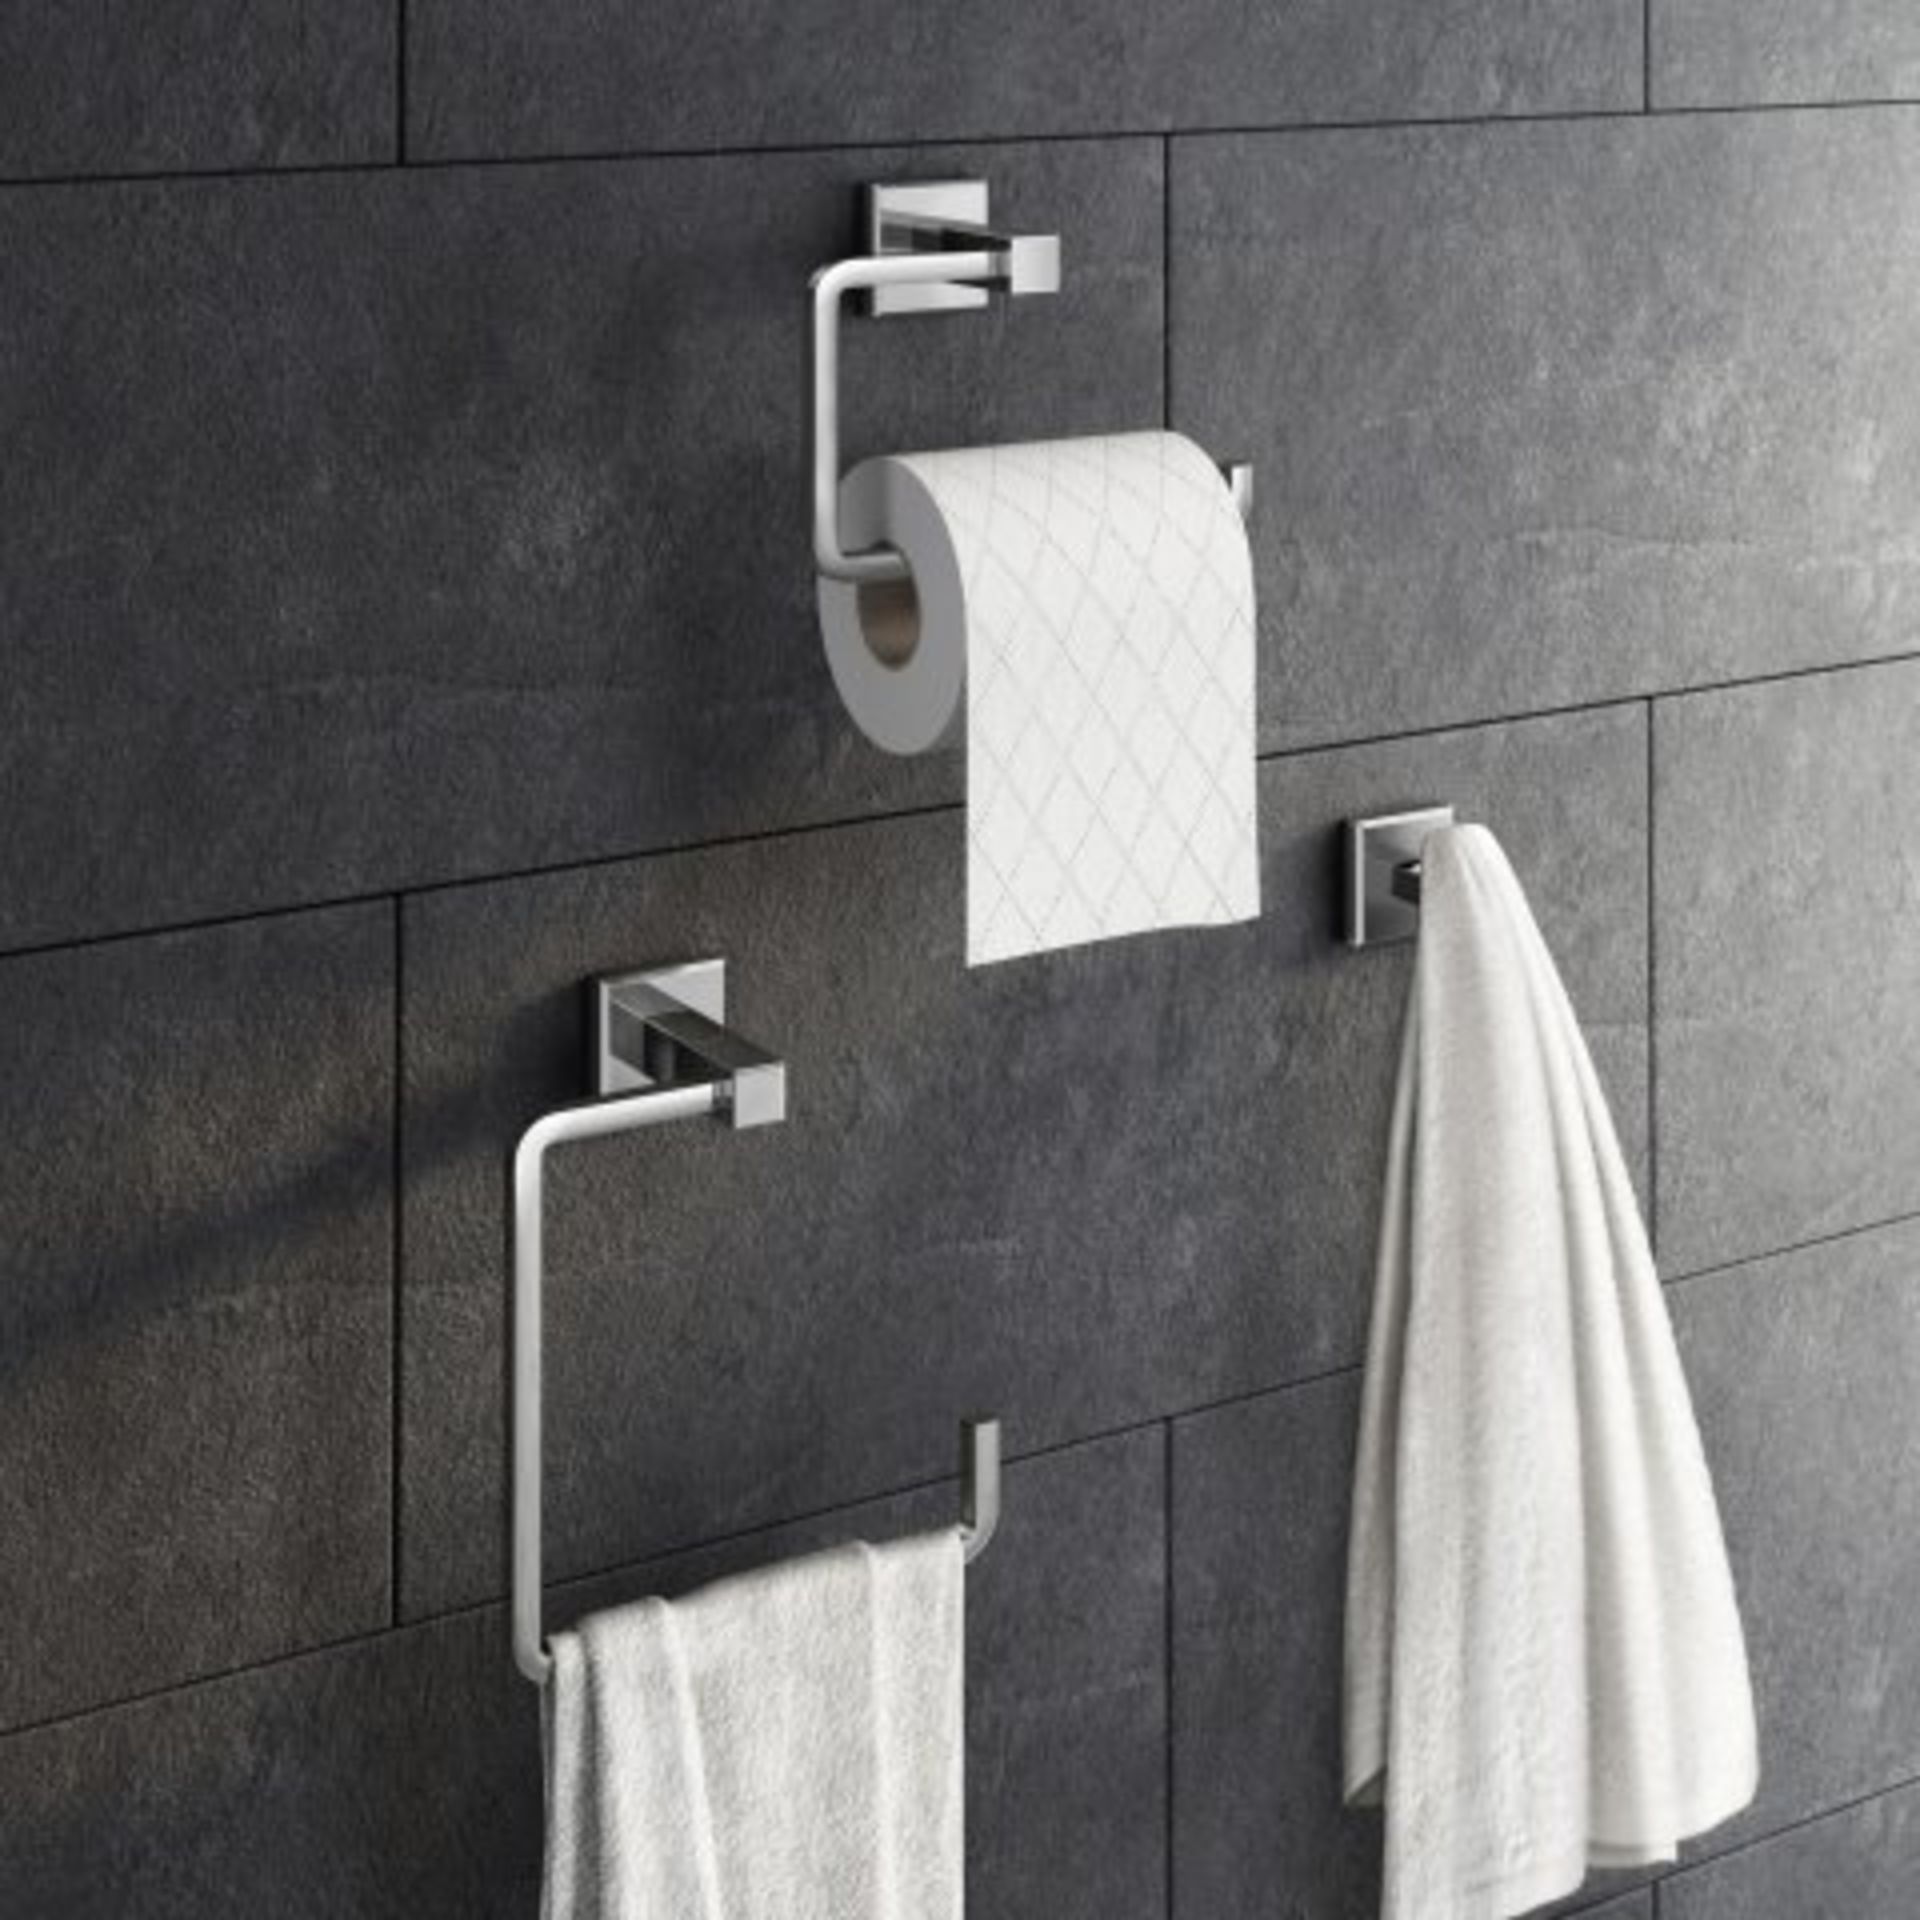 (I30) Henley Bathroom Accessory Set Paying attention to detail can massively uplift your bathroom